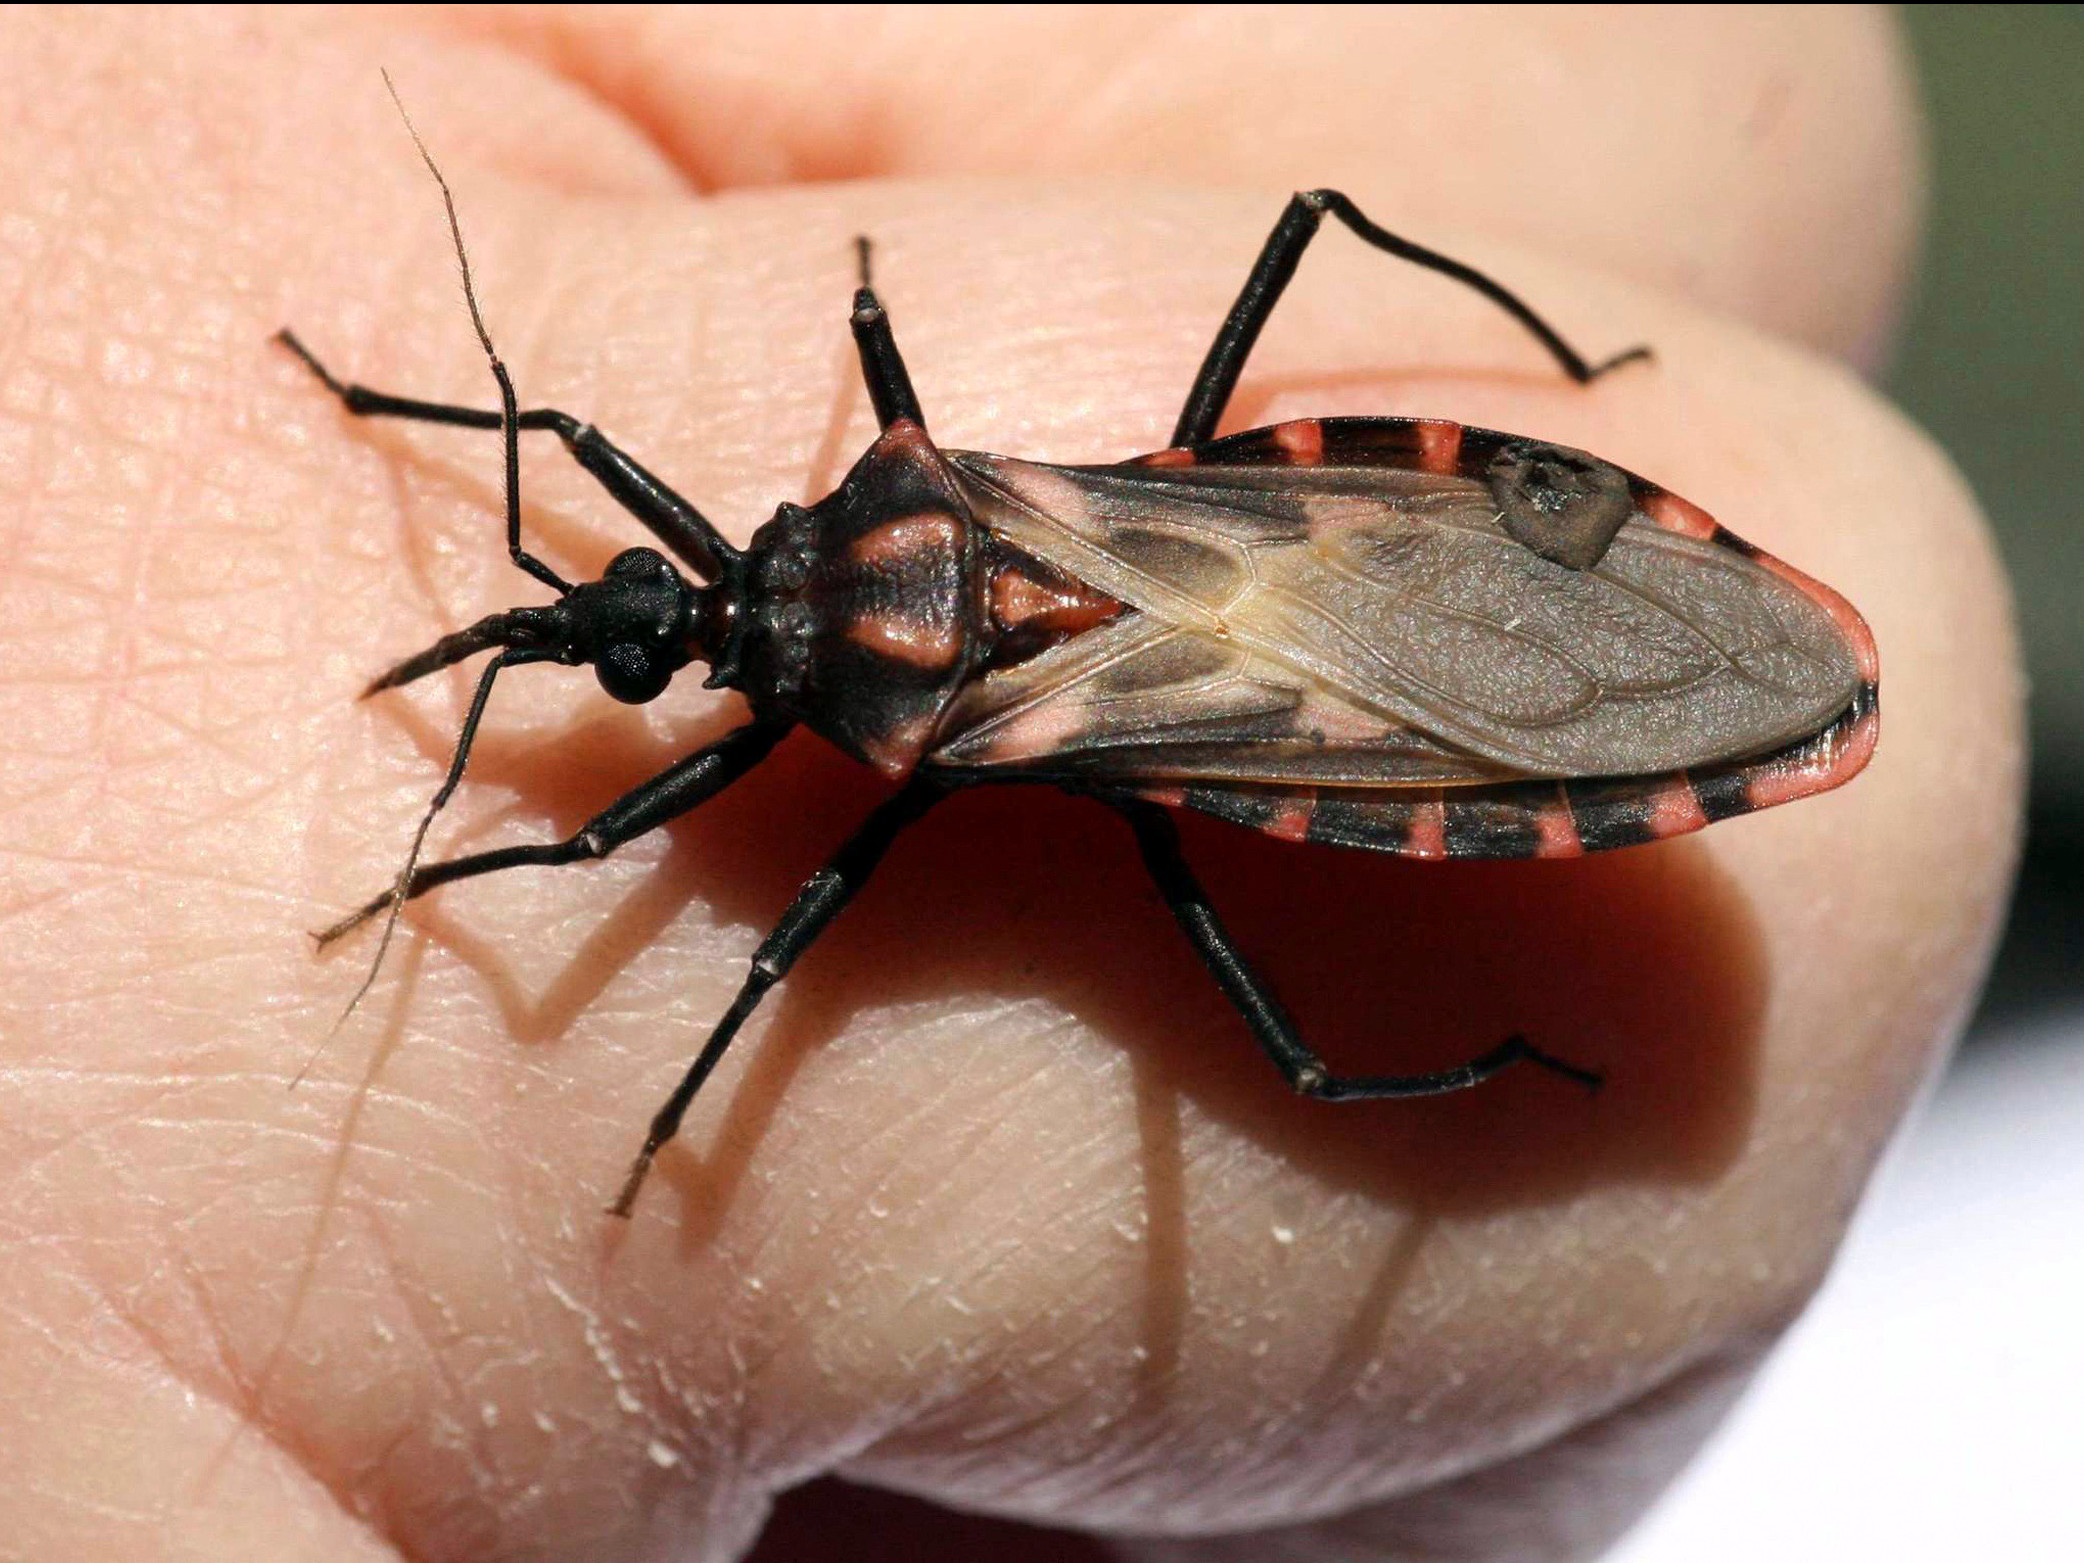 a-parasitic-illness-from-kissing-bugs-that-bite-your-face-at-night-is